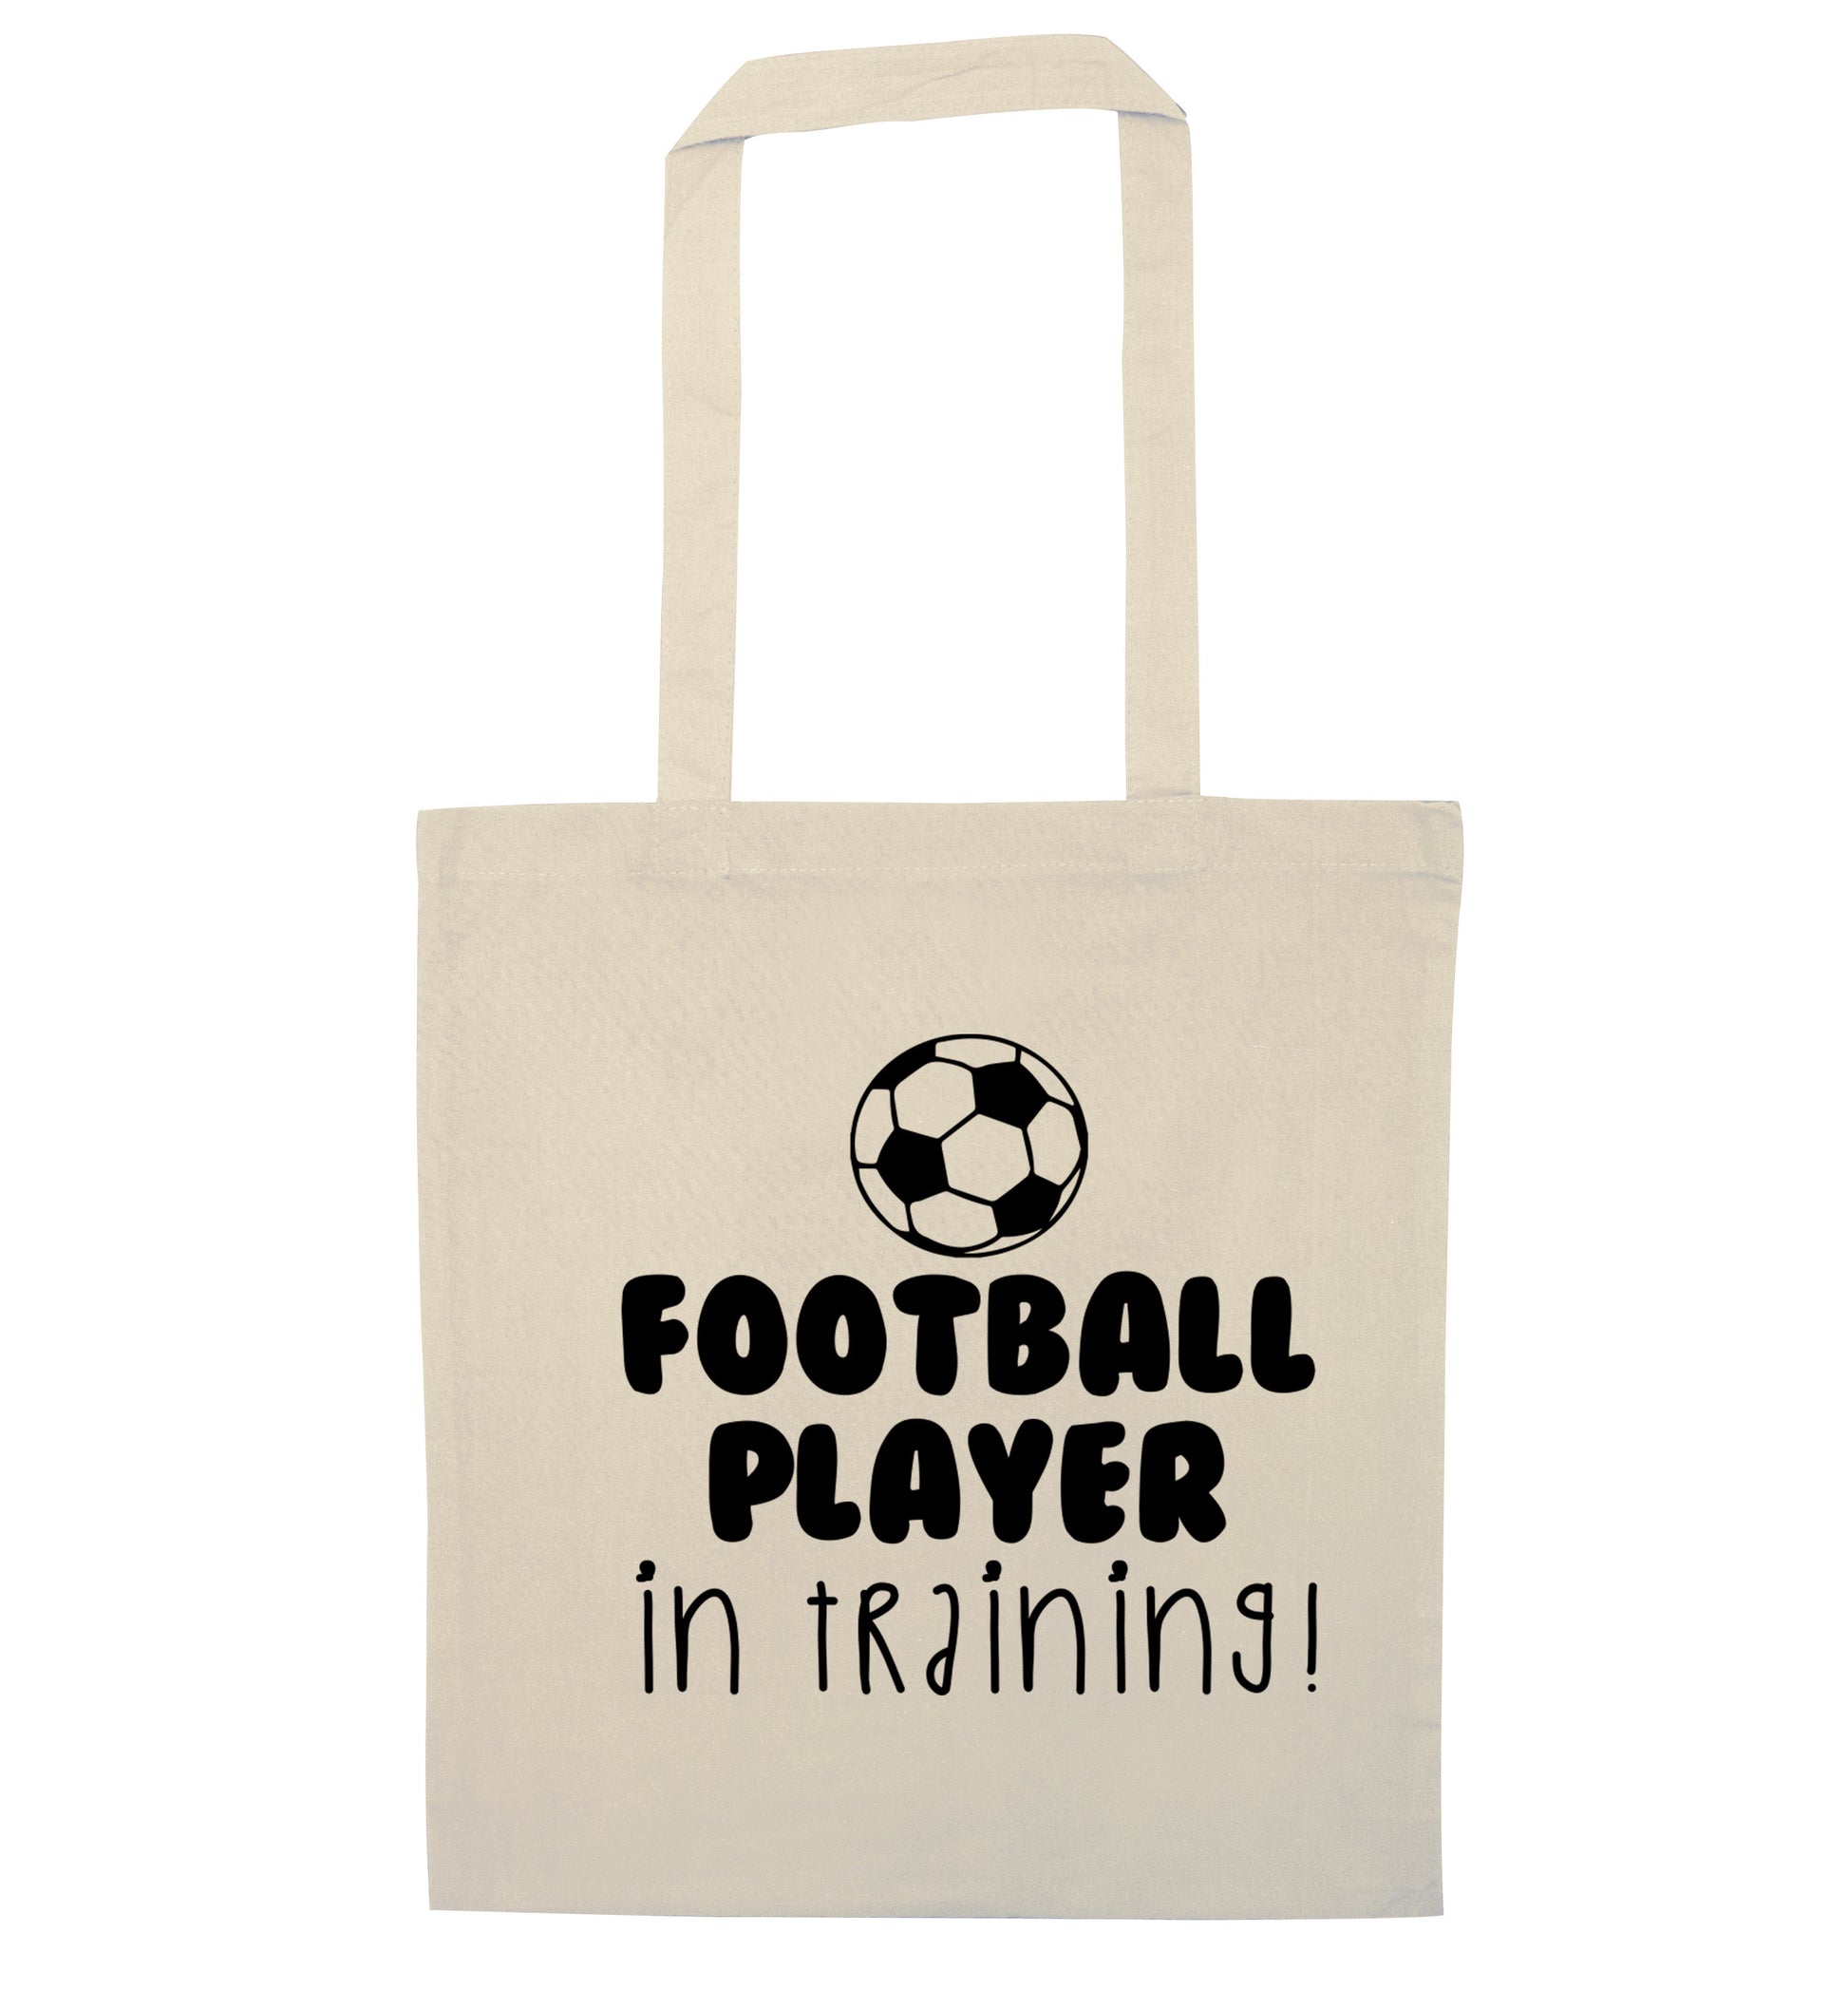 Football player in training natural tote bag